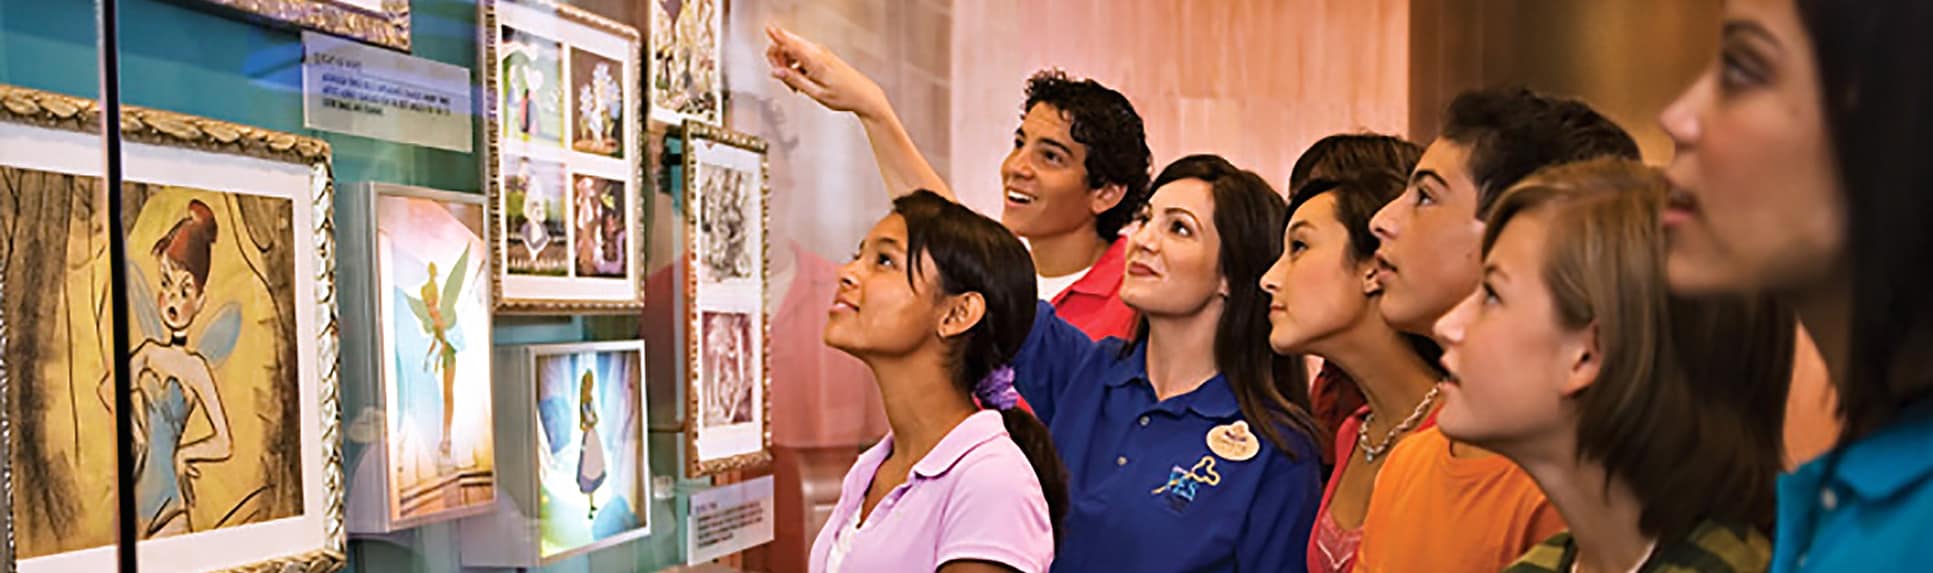 A Cast Member showing young adults Disney portraits encased in a glass display